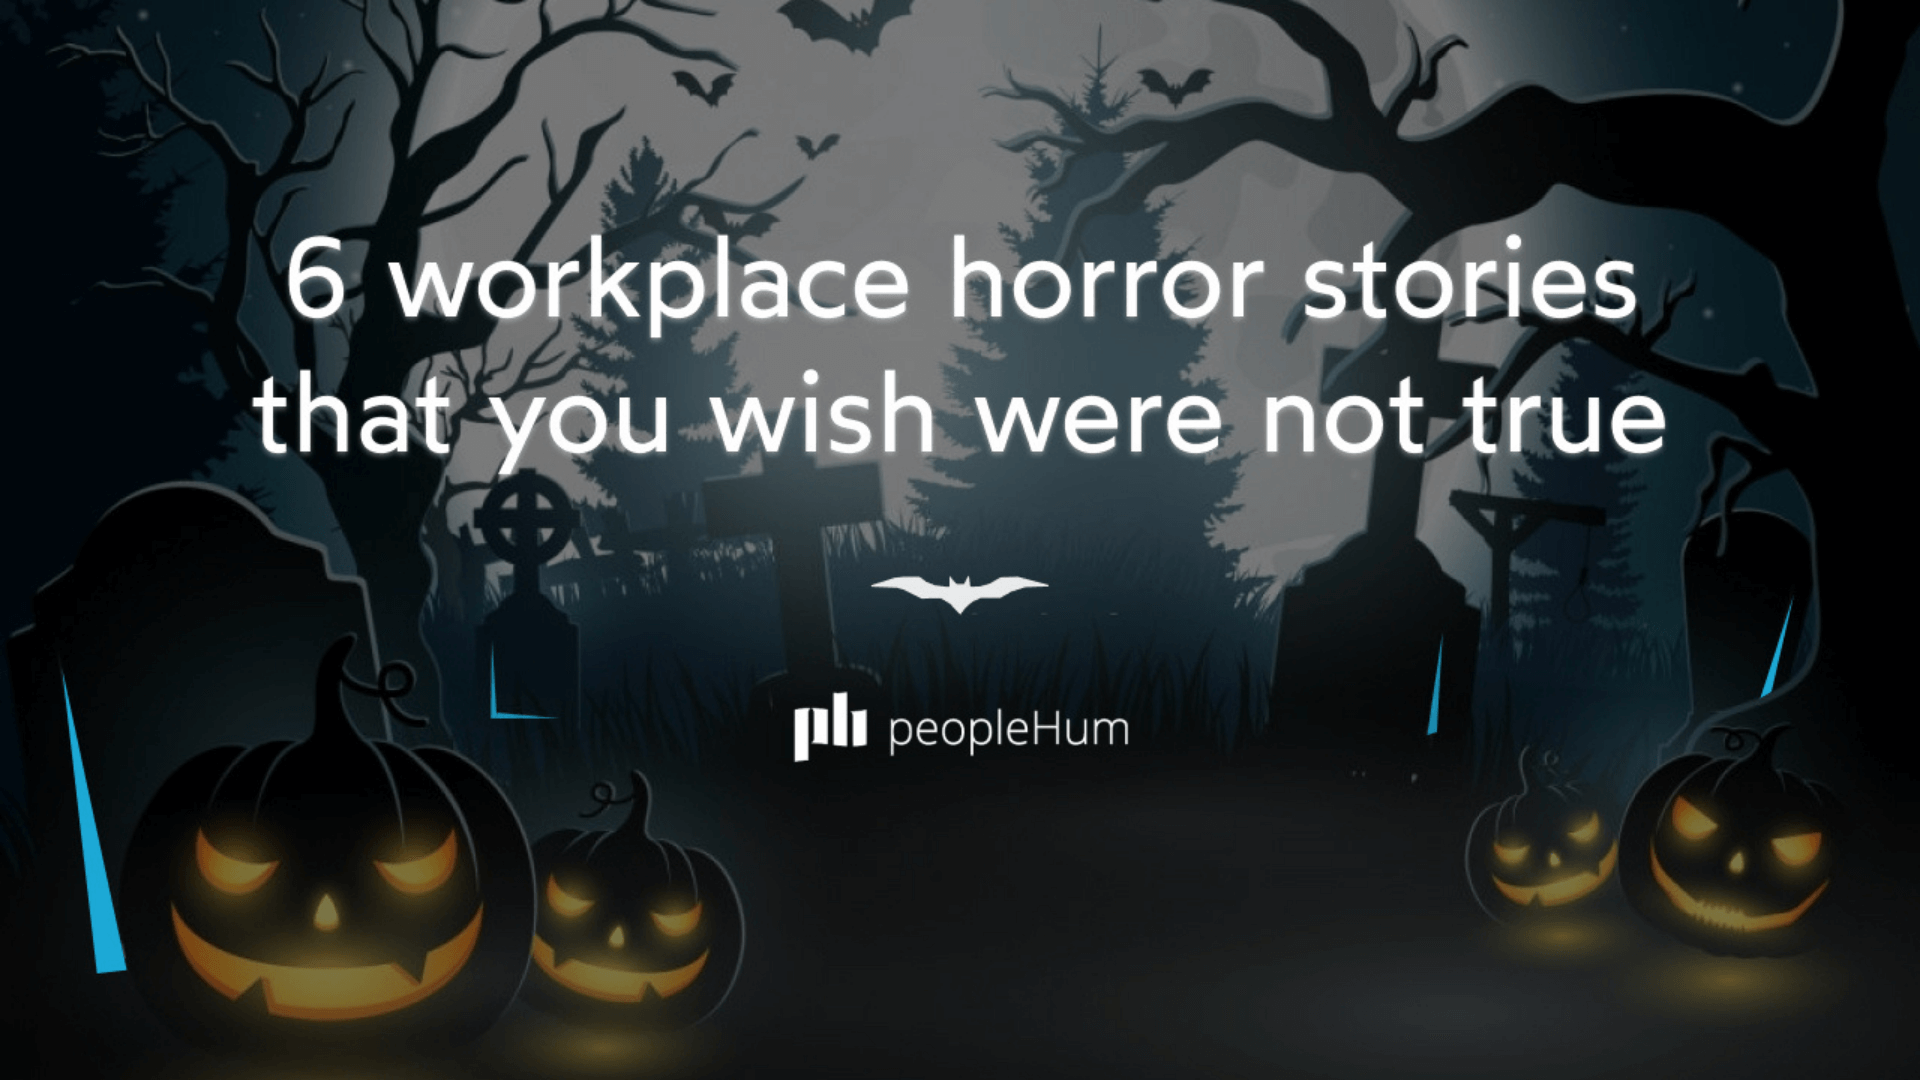 6 workplace horror stories that you wish were not true